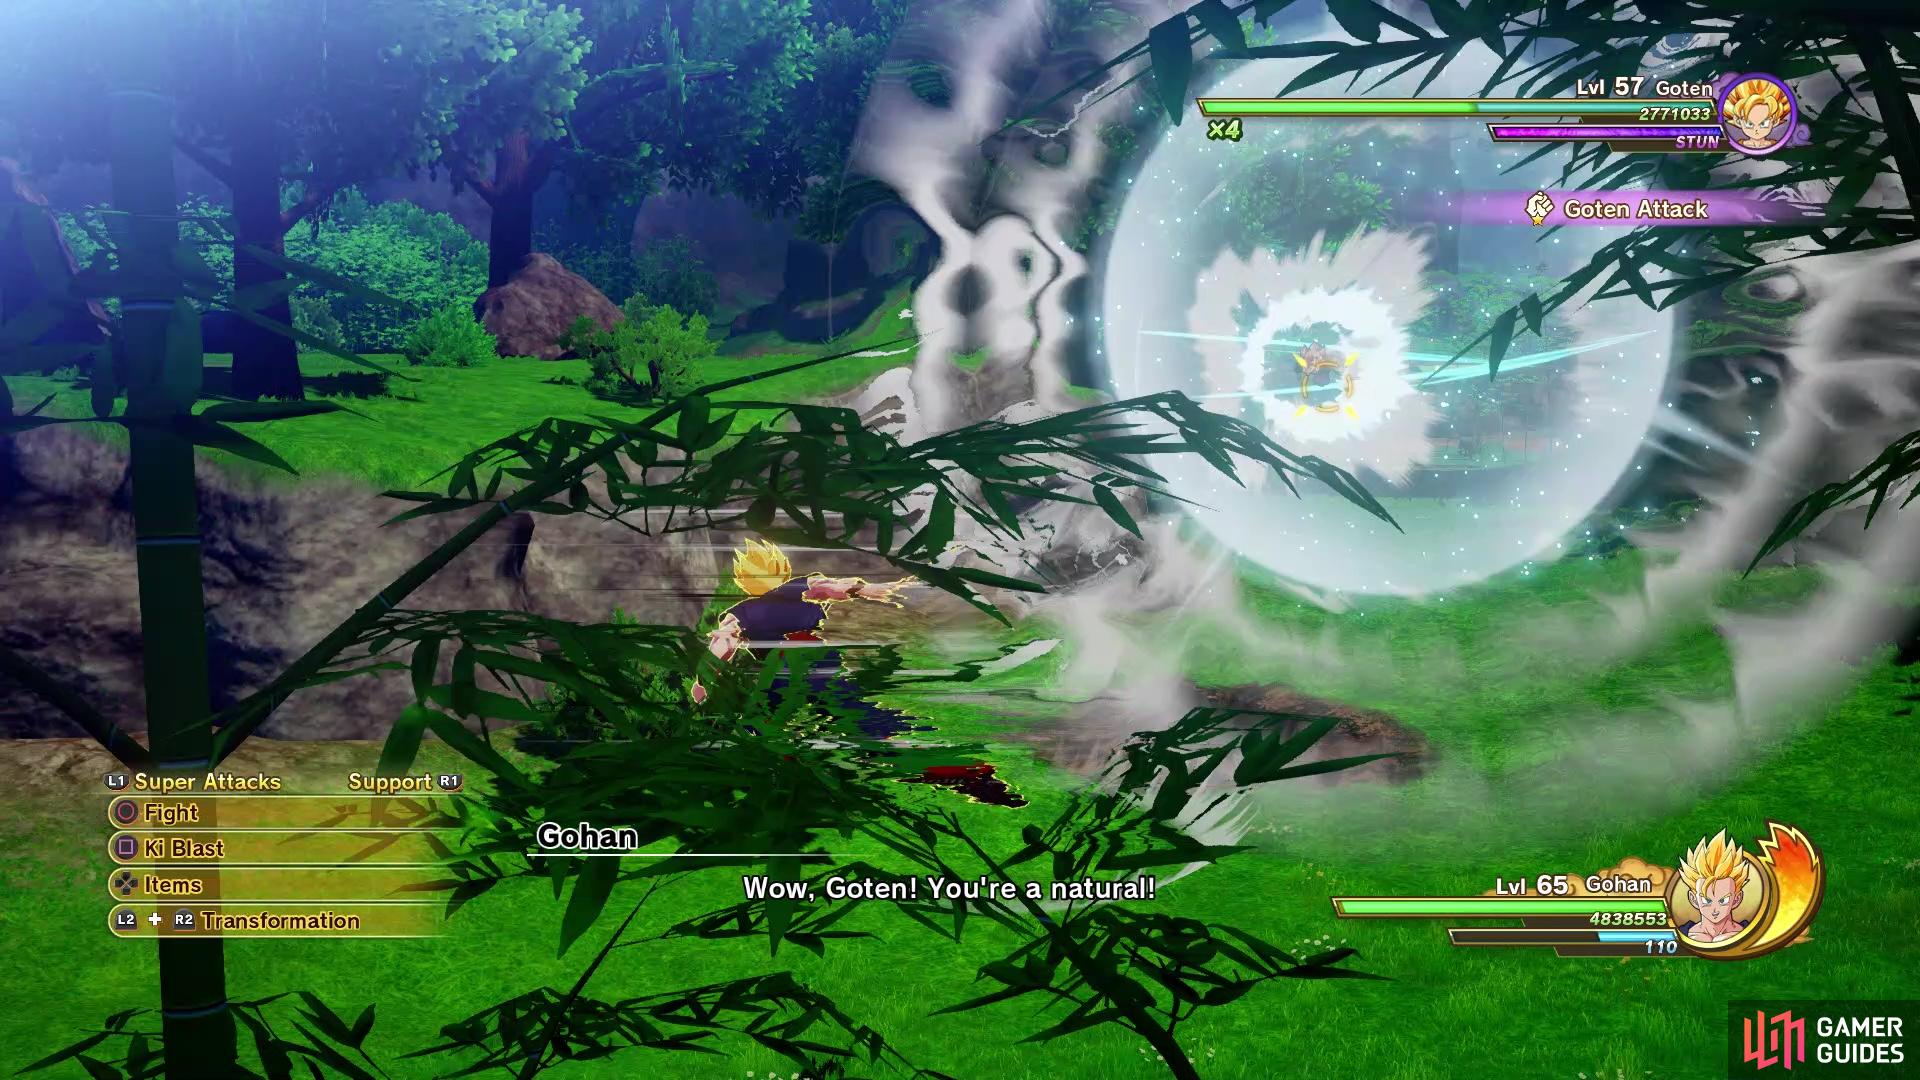 Goten’s only move is to charge at you, which is easy to block/dodge